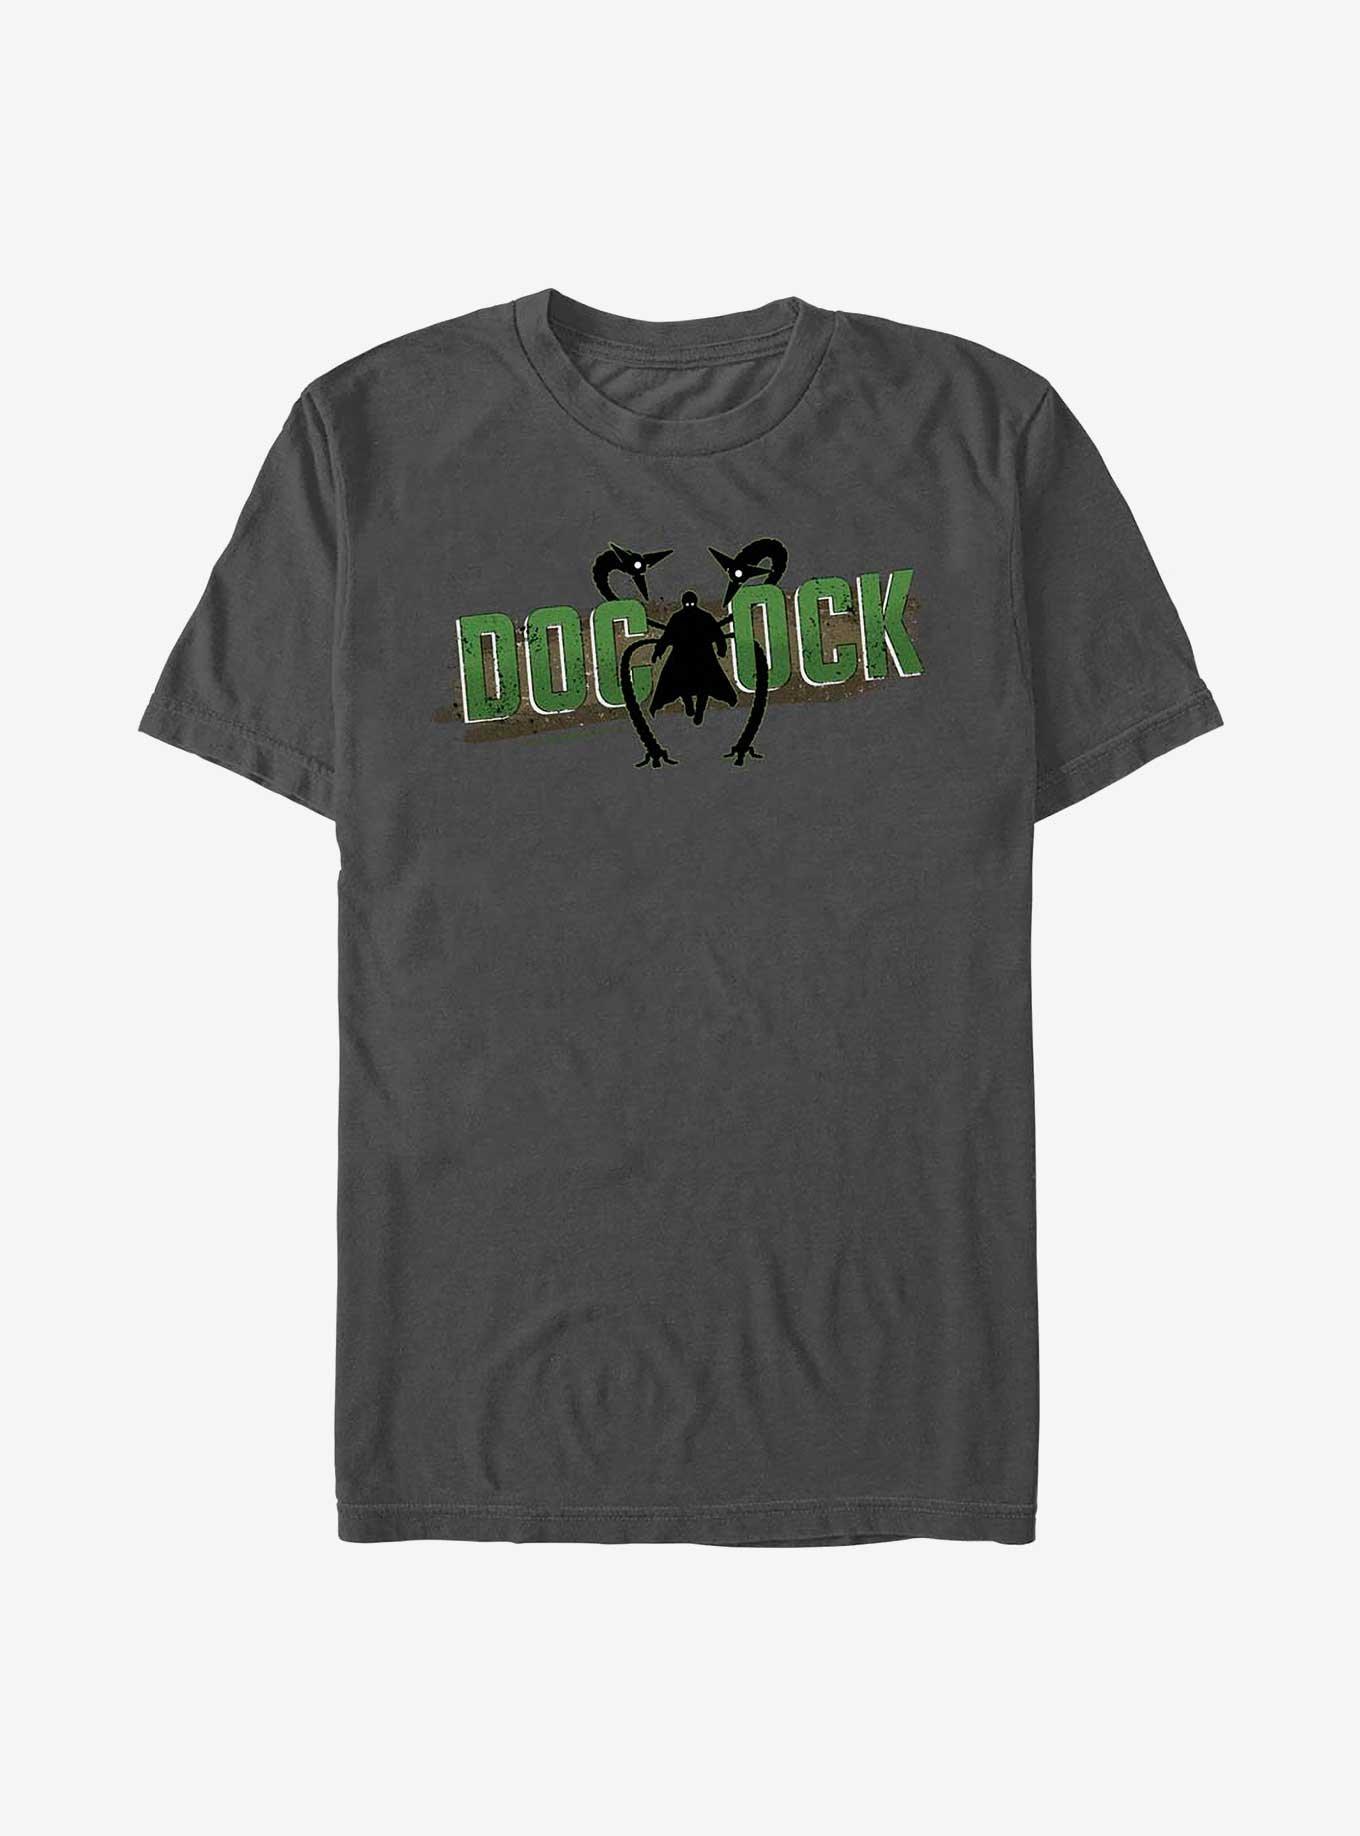 Marvel's Spider-Man Ock Silhouette T-Shirt, CHARCOAL, hi-res